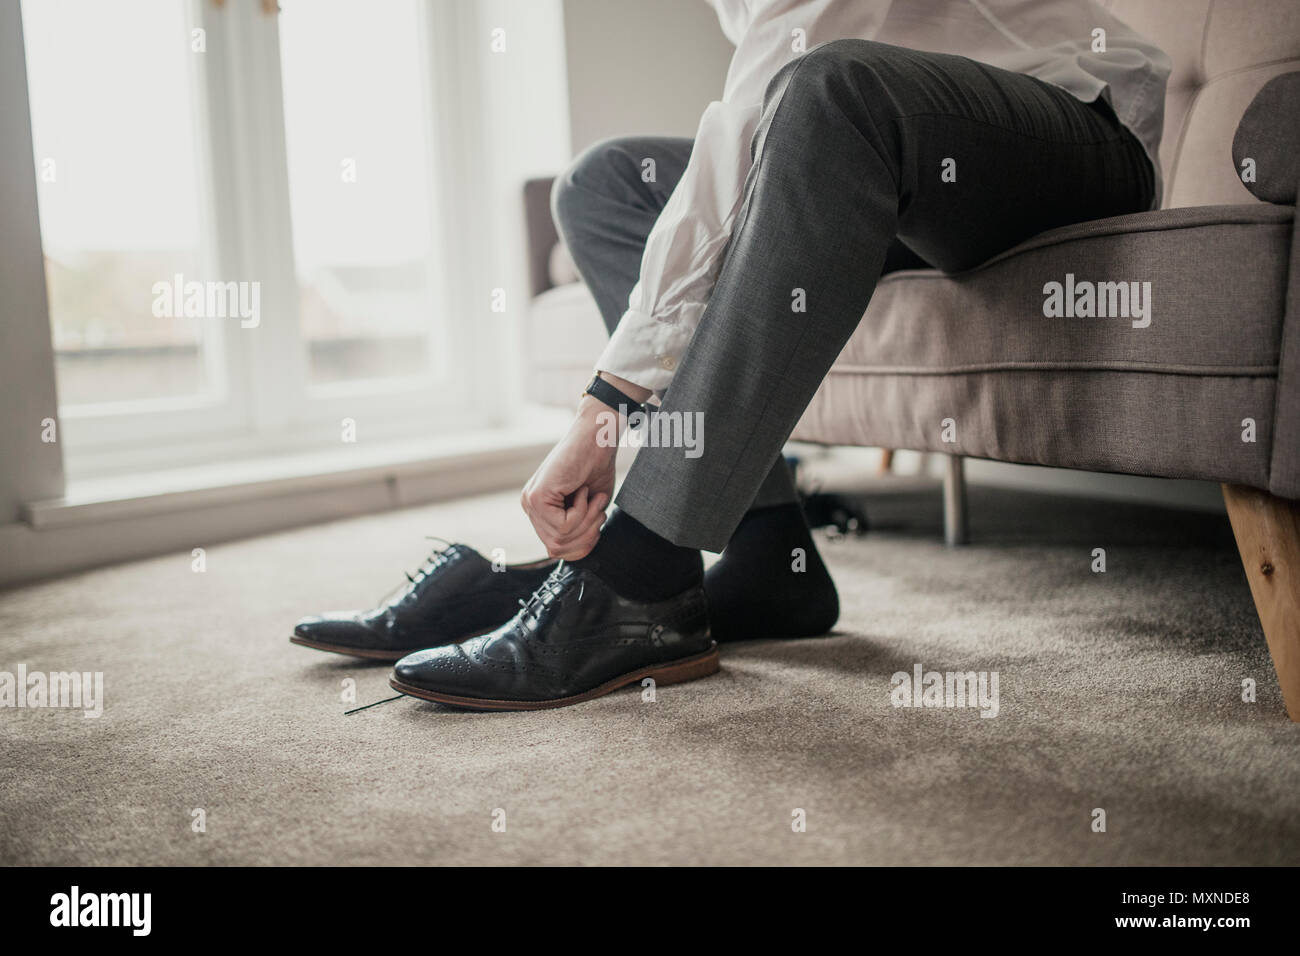 Unrecognisable person adult male sitting on a sofa in a domestic room tying his shoelaces. Stock Photo